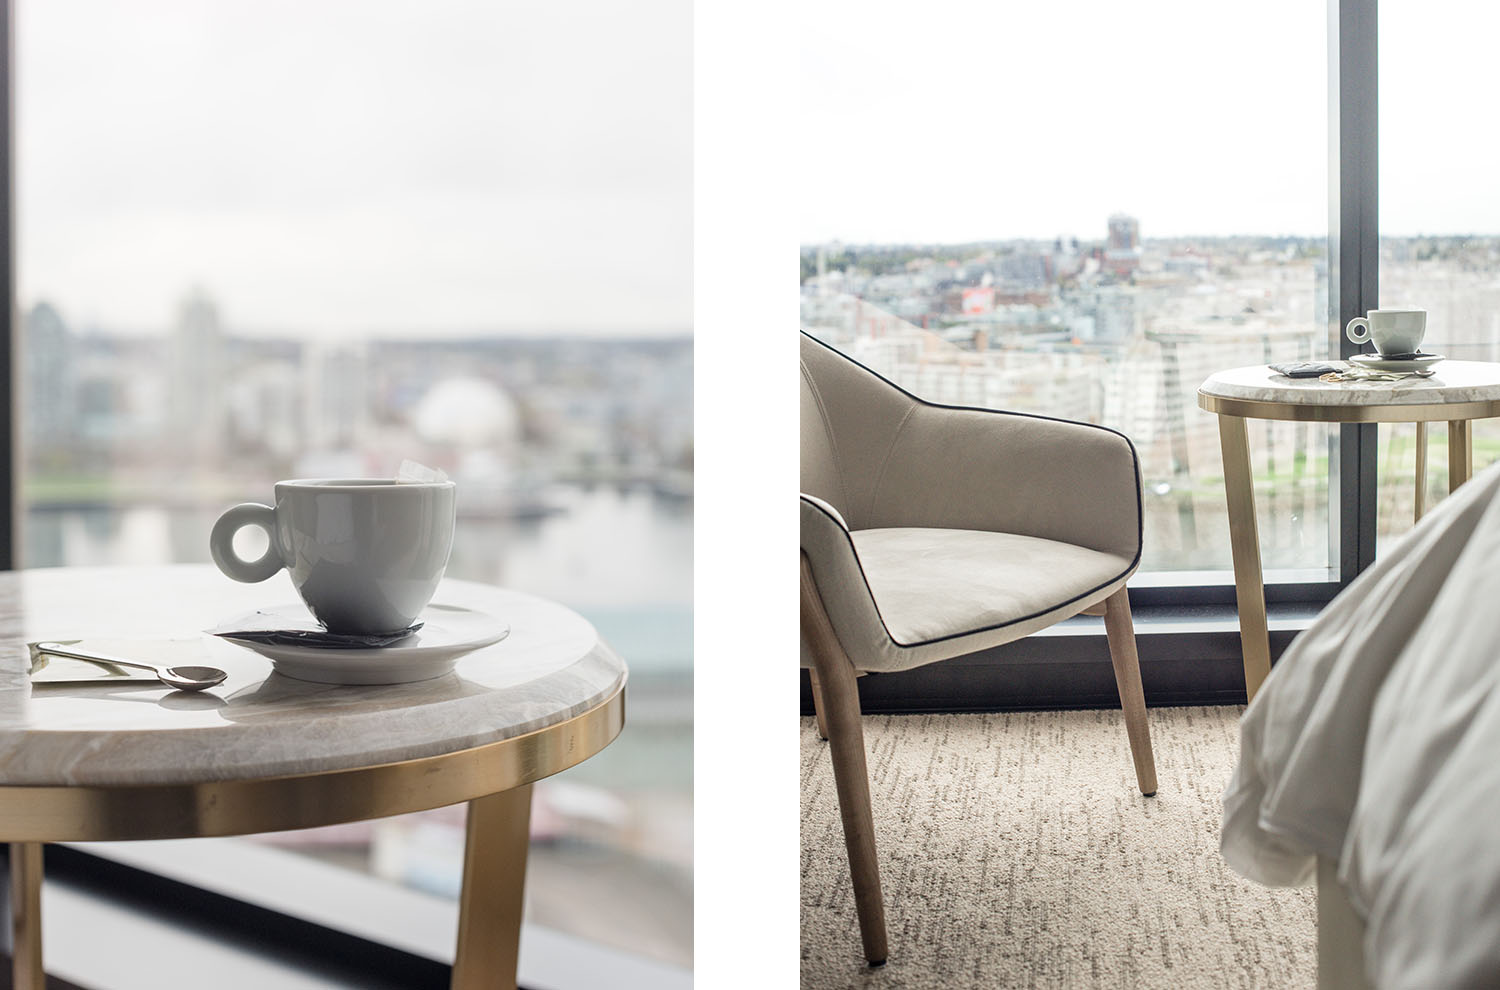 Tea with a view of Yaletown at the JW Marriott Parq Vancouver hotel, as captured by Winnipeg travel blogger Cee Fardoe of Coco & Vera